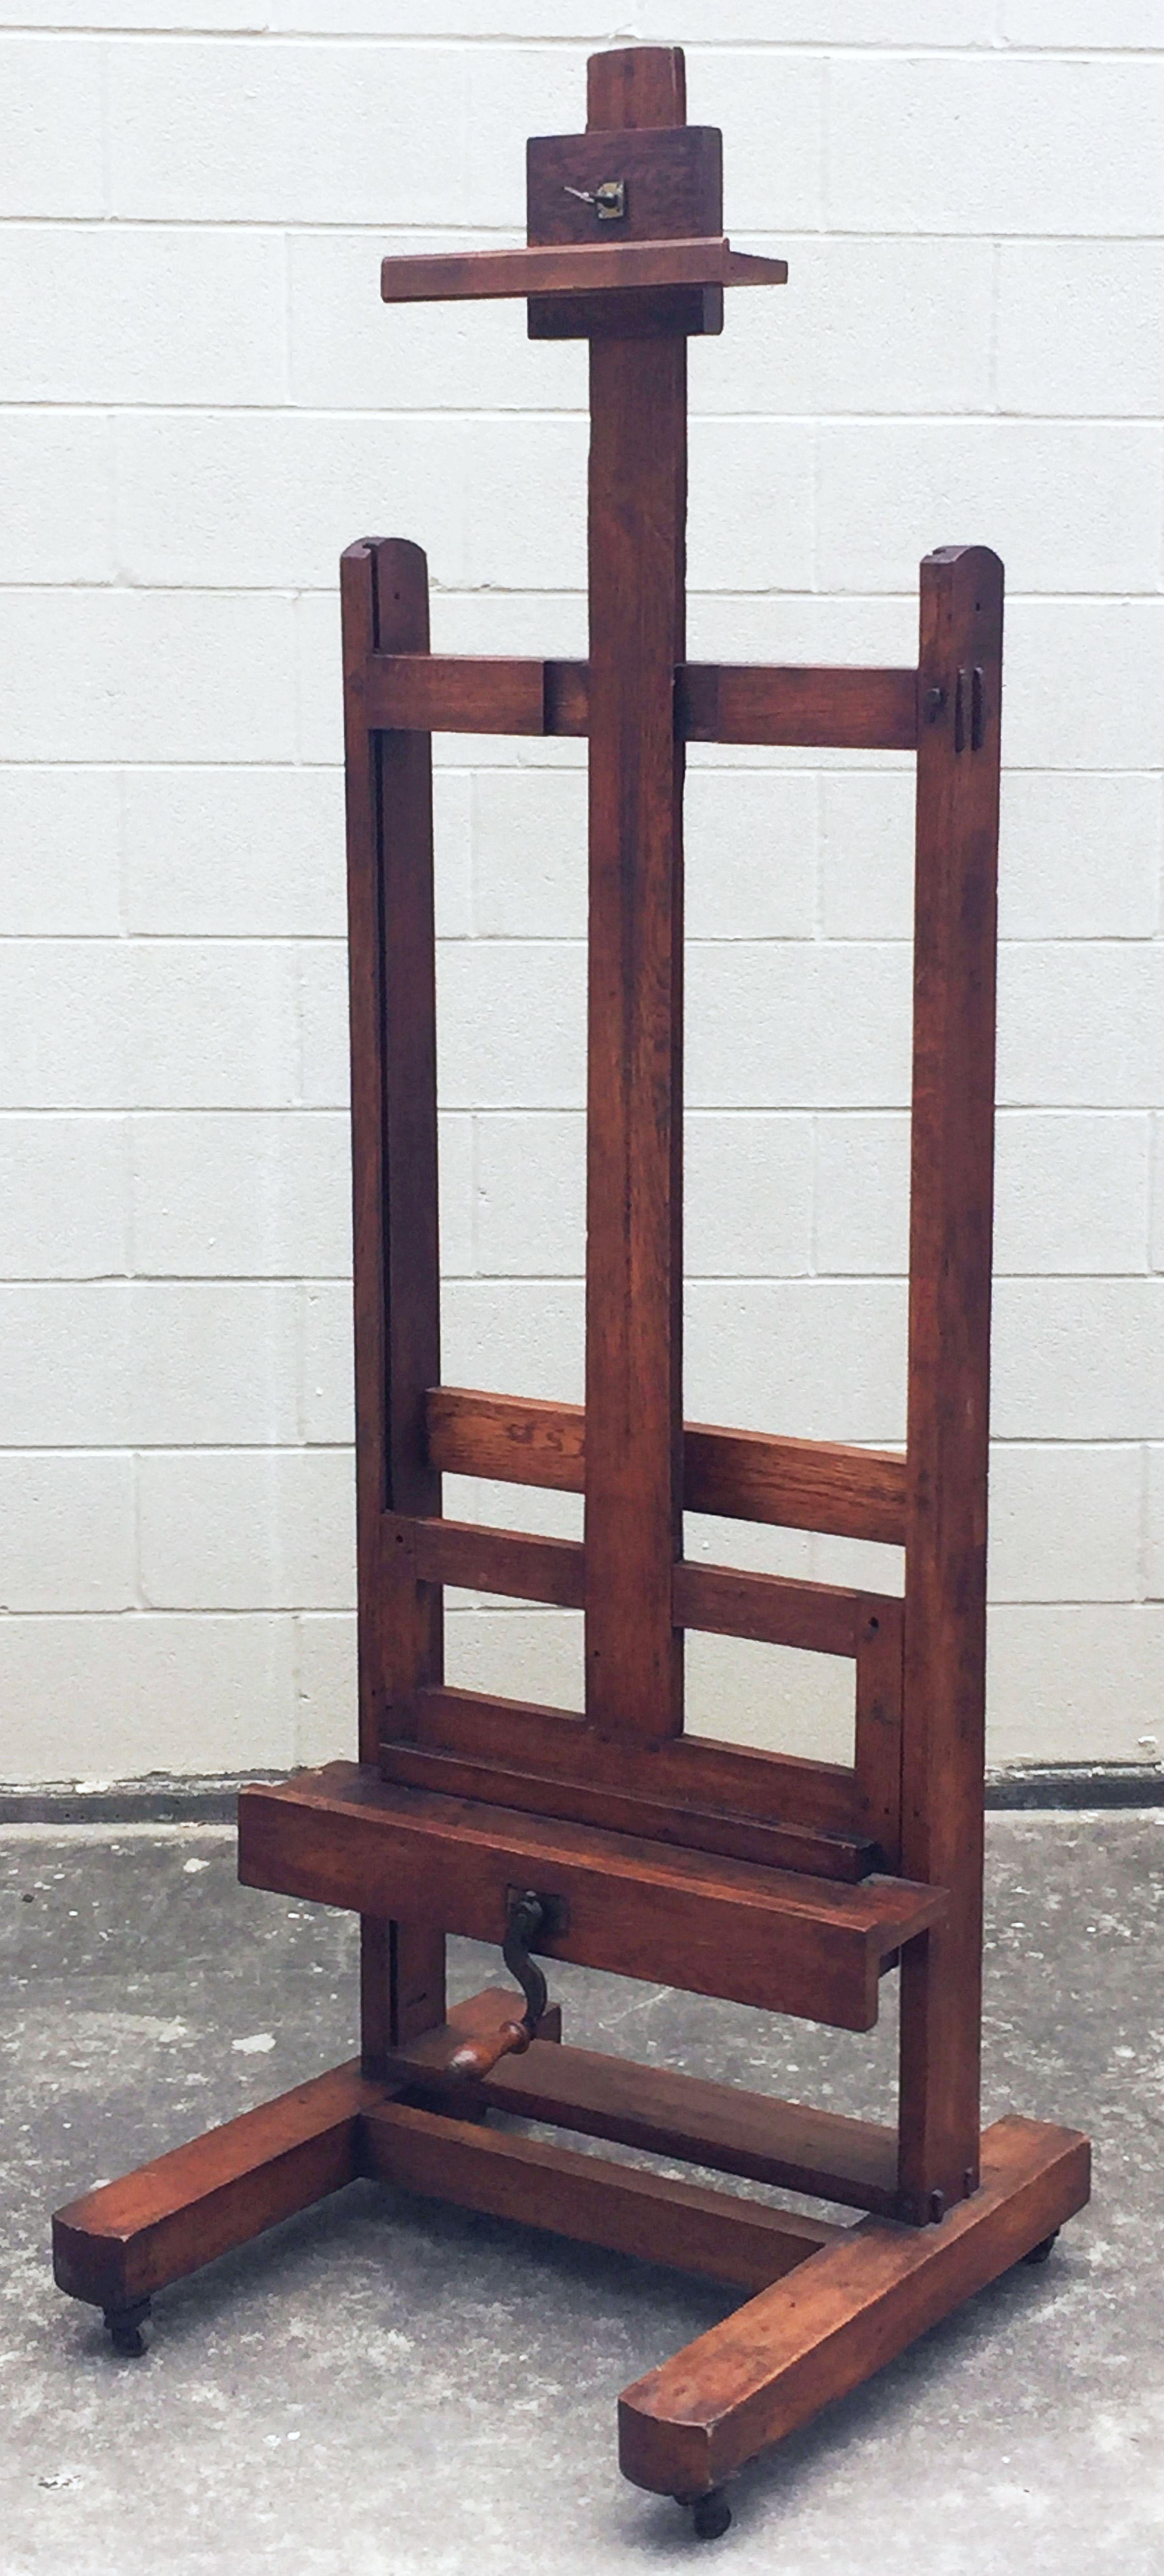 A handsome English artist's display or studio floor easel from the early 20th century, featuring a functioning crank mechanism to adjust the tray height, solid beam construction, on rolling casters. 

With an adjustable height of 73 inches to 102